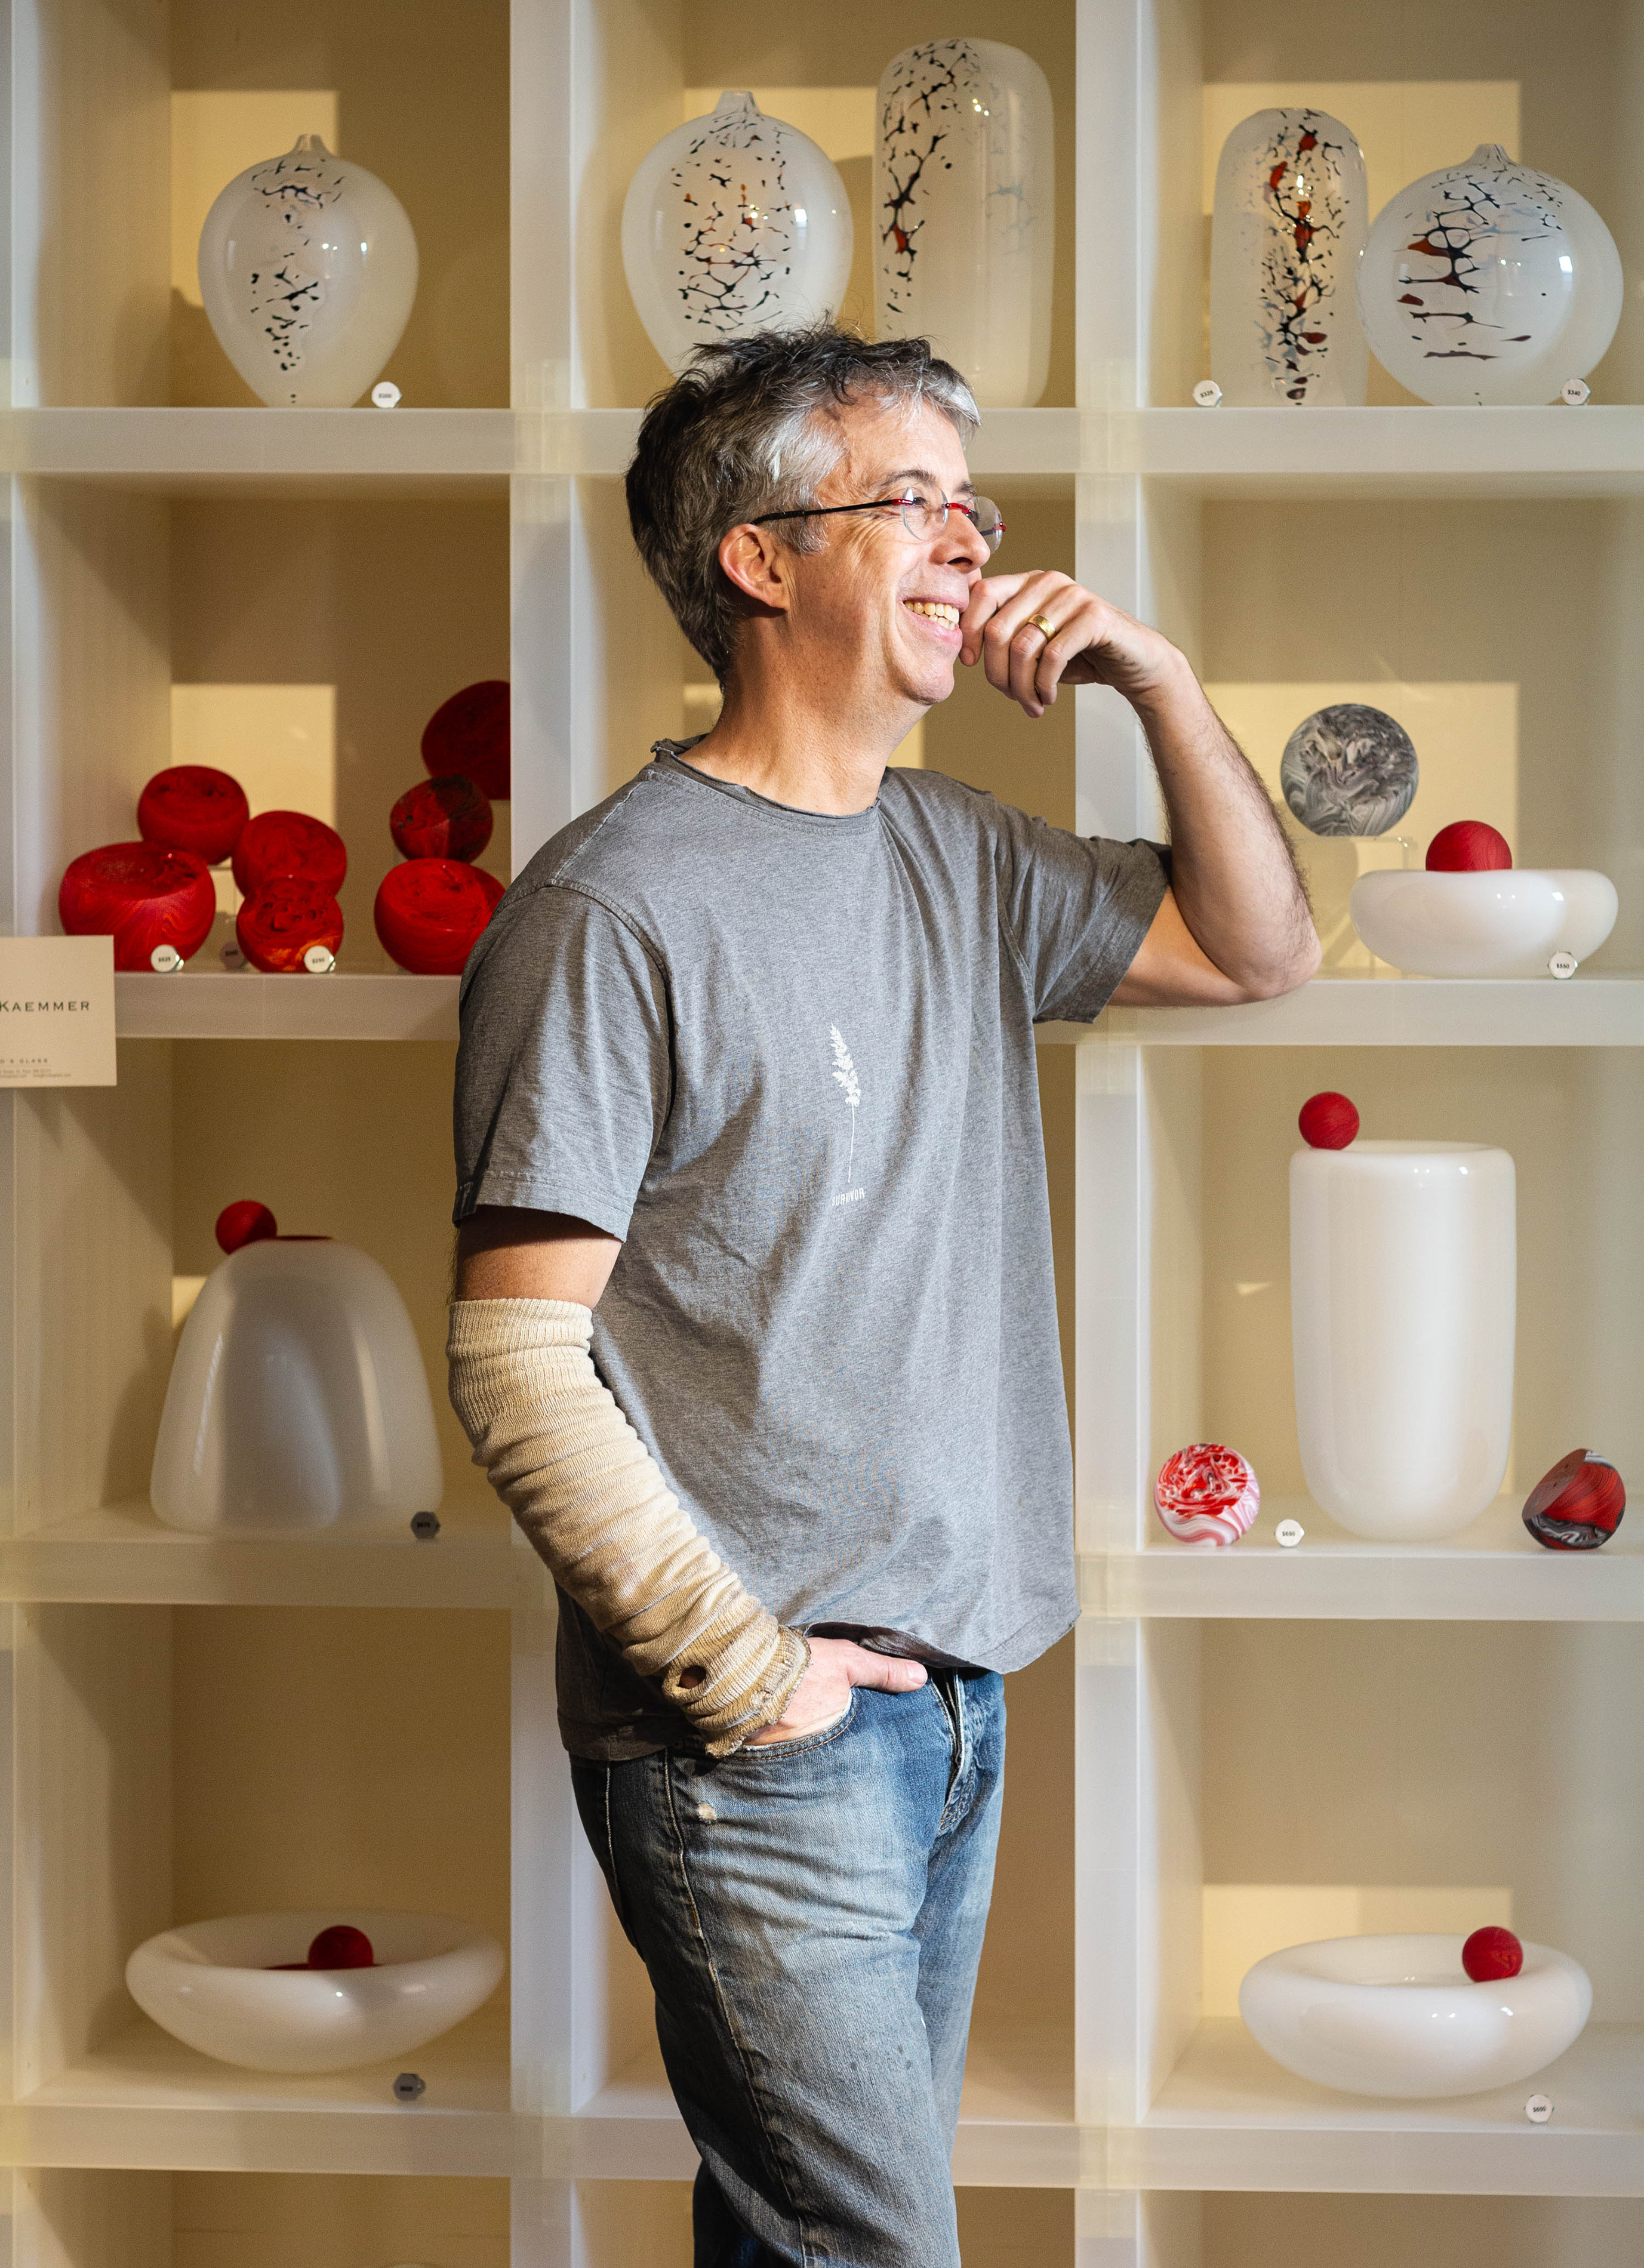 Glass artist Fred Kaemmer stands before a shelf of finished work in his studio. Photo by Dina Kantor.